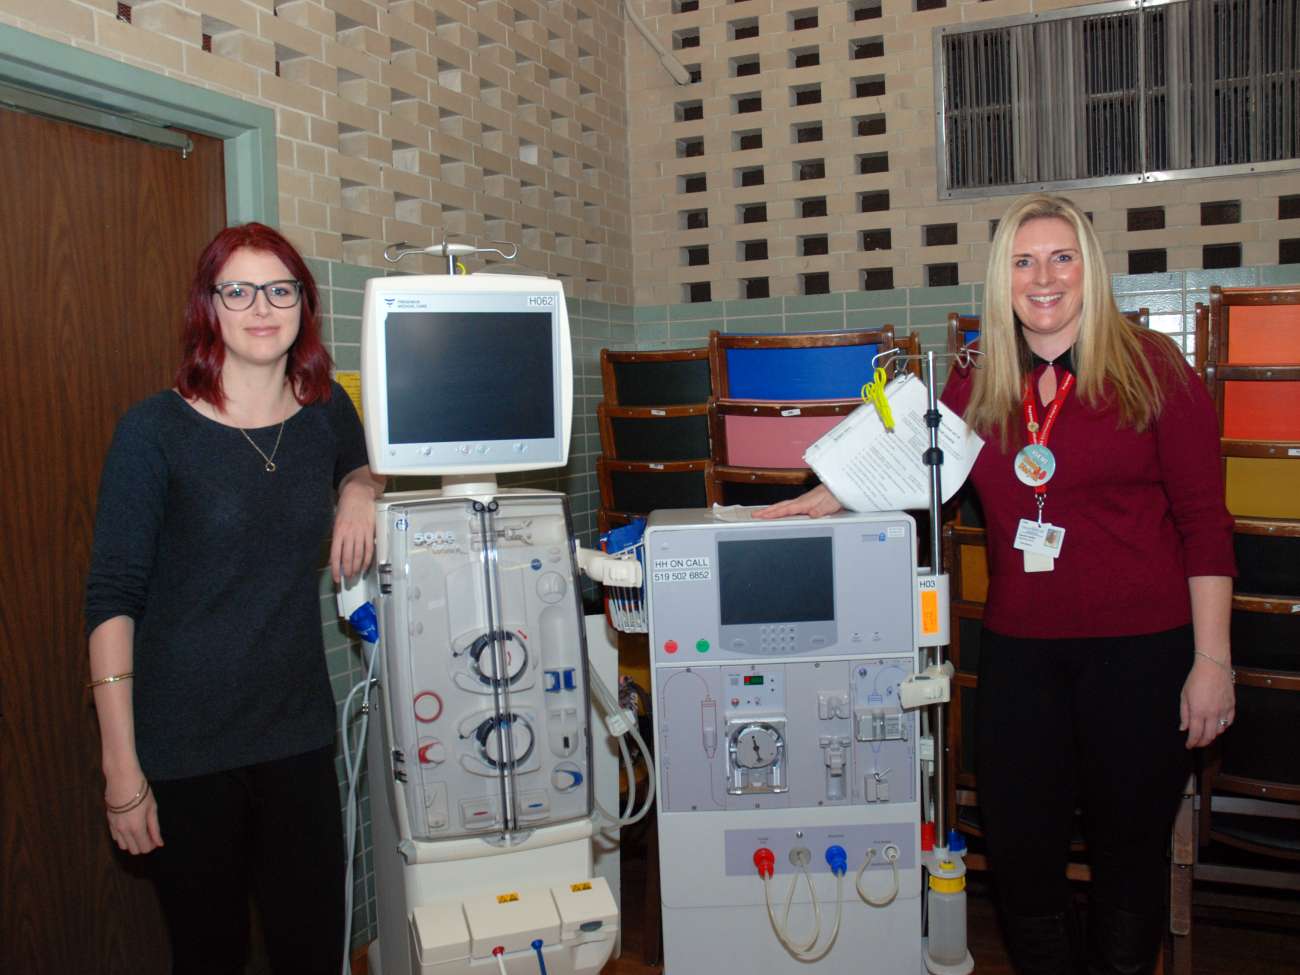 Event organizers Kate McCabe and Sandra Nuttin with home dialysis machines